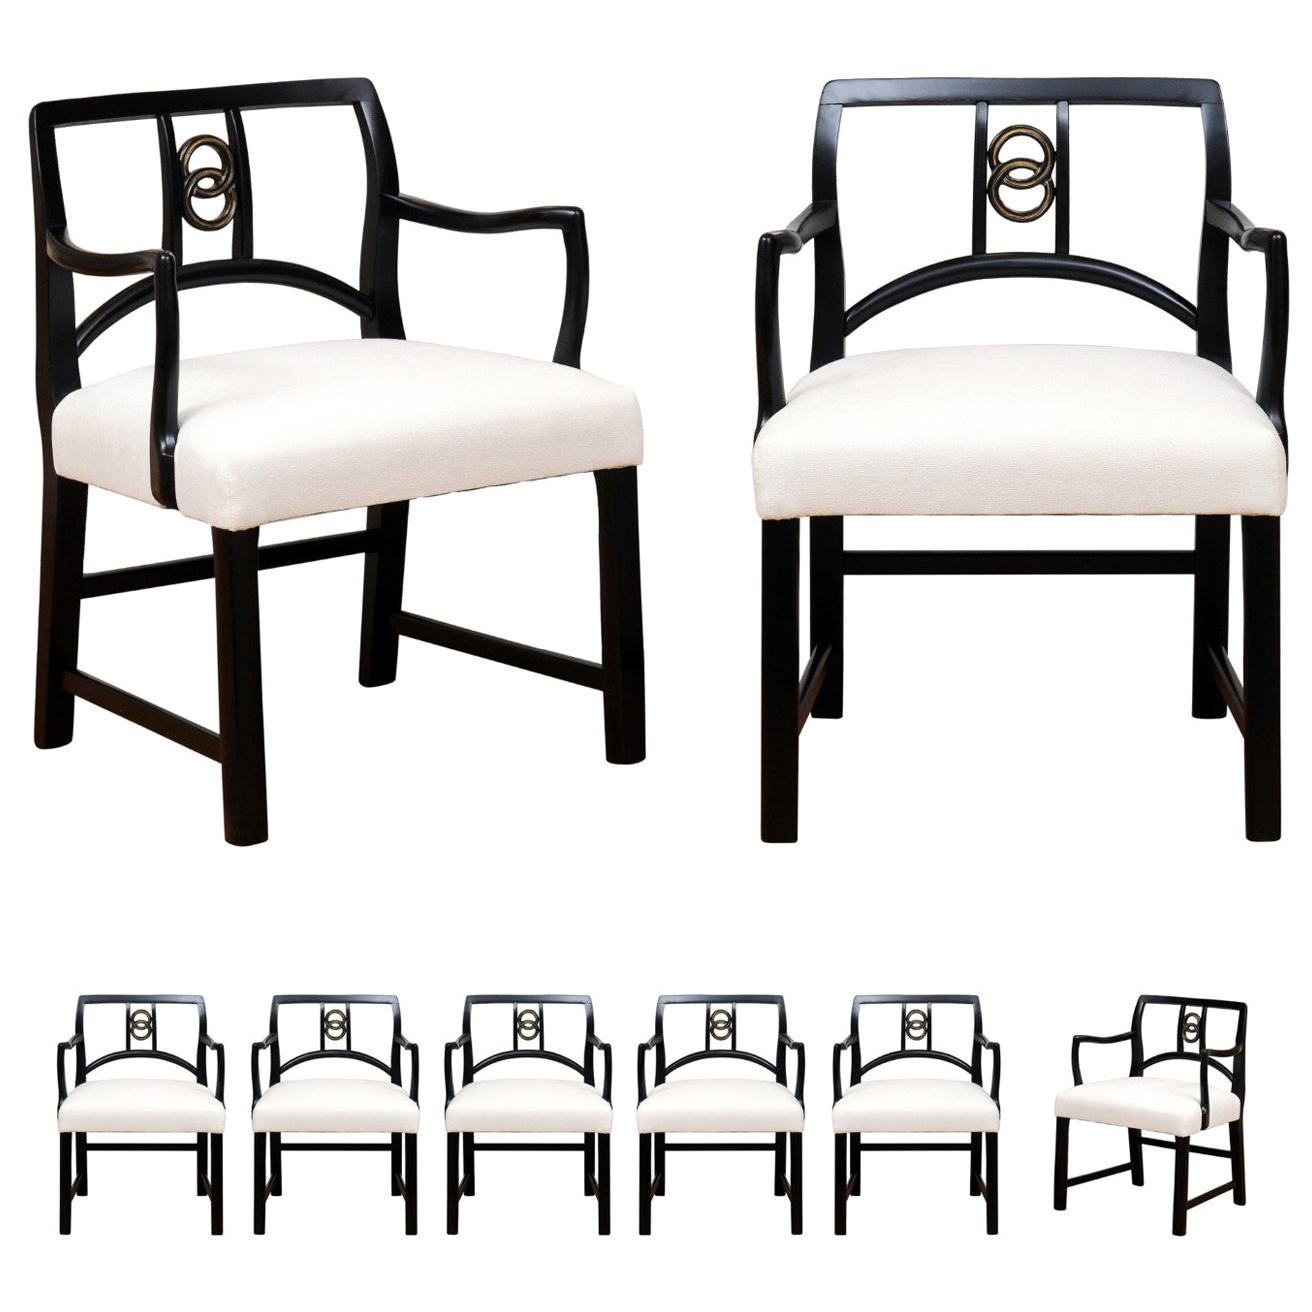 All Arms - Chic Set of 8 Dining Chairs by Michael Taylor for Baker, circa 1960